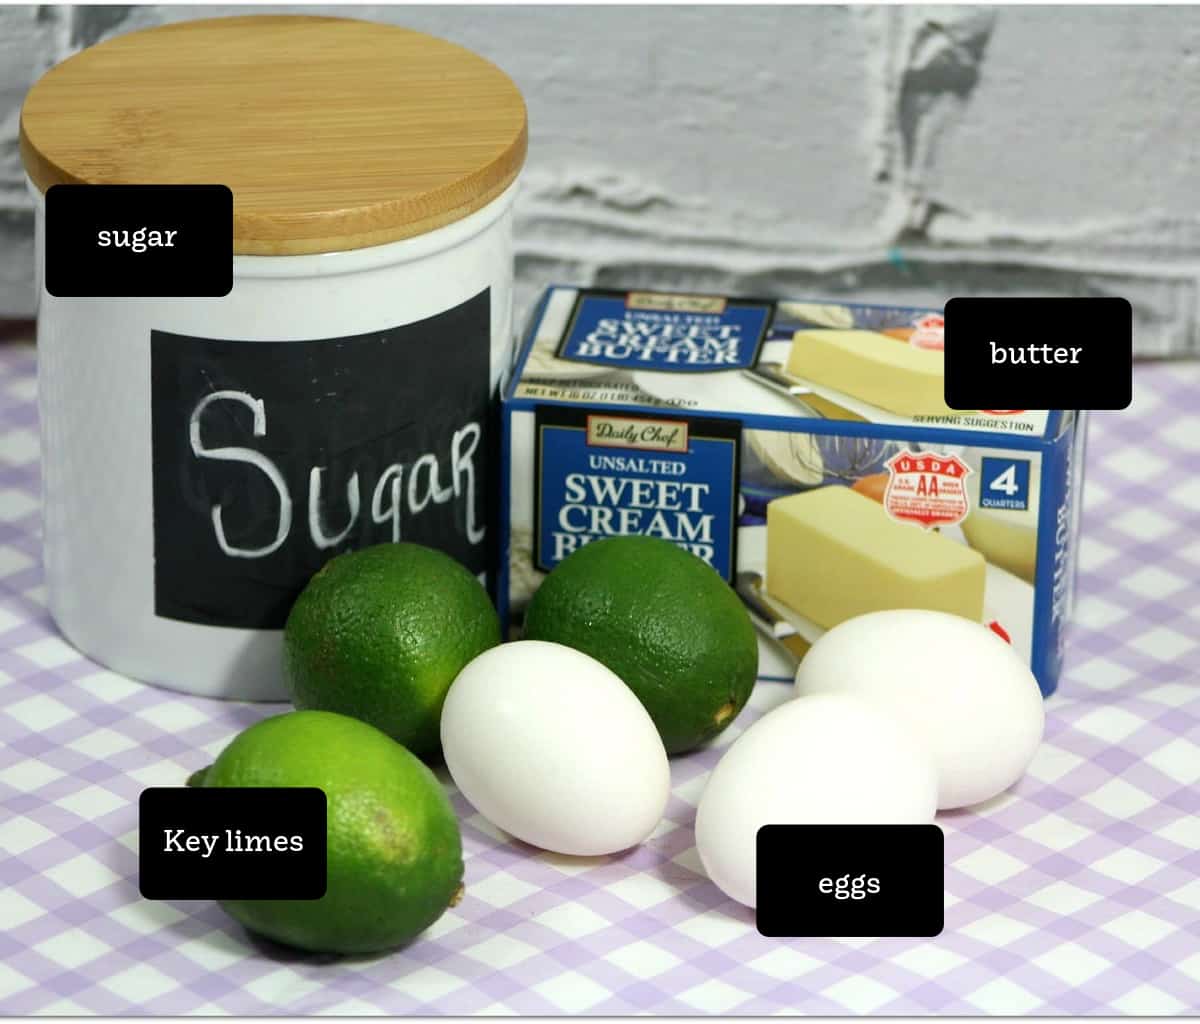 Ingredients for Key Lime curd.